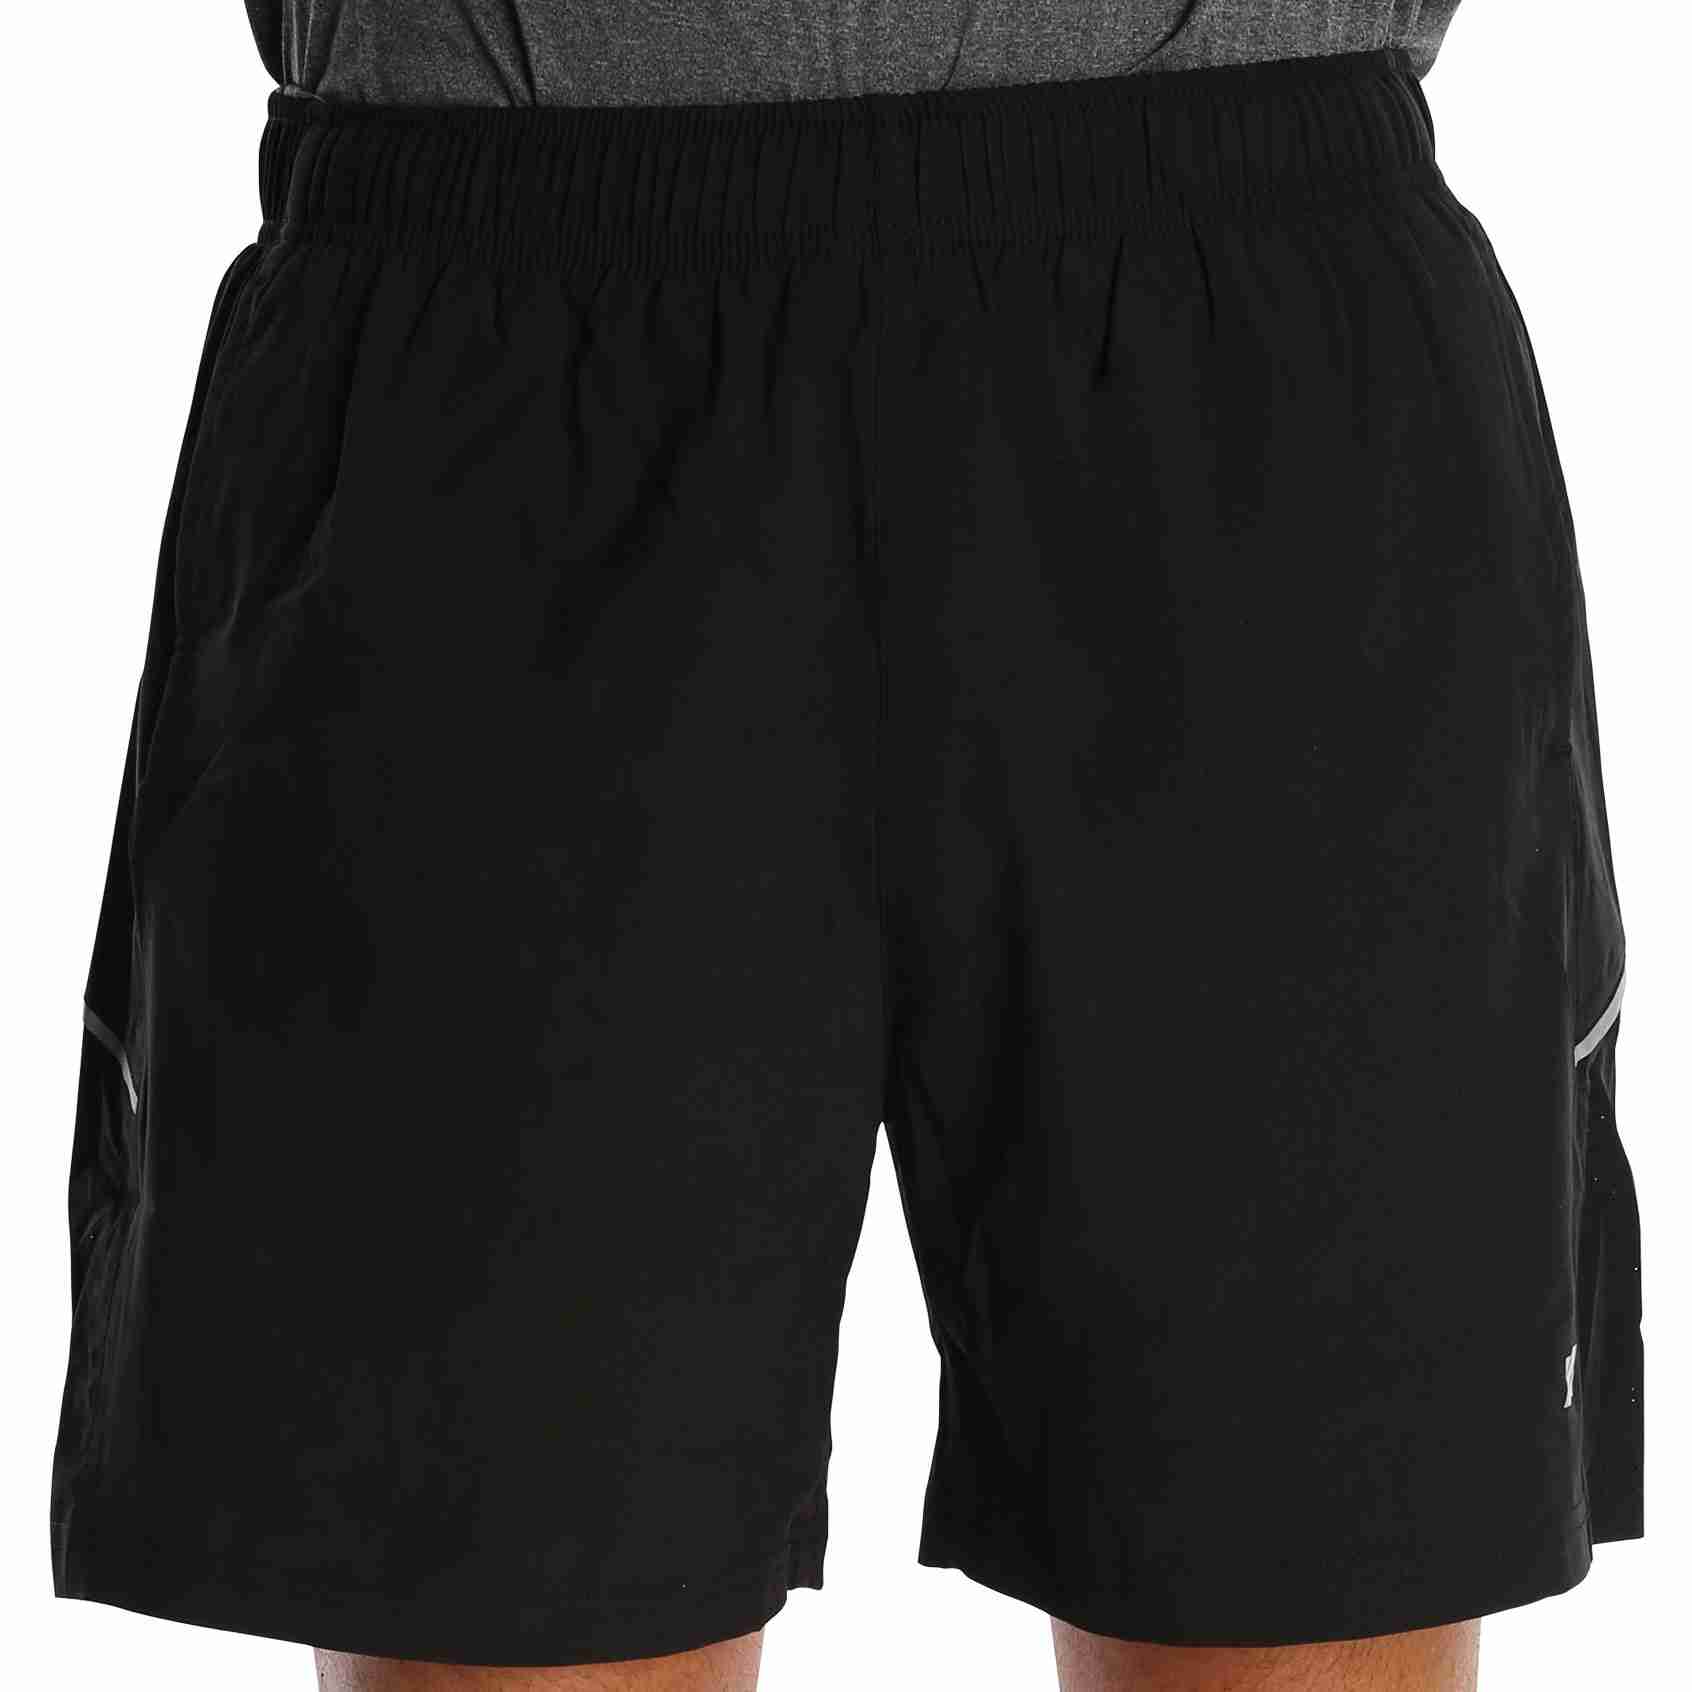 mens-running-shorts with cash back rebate